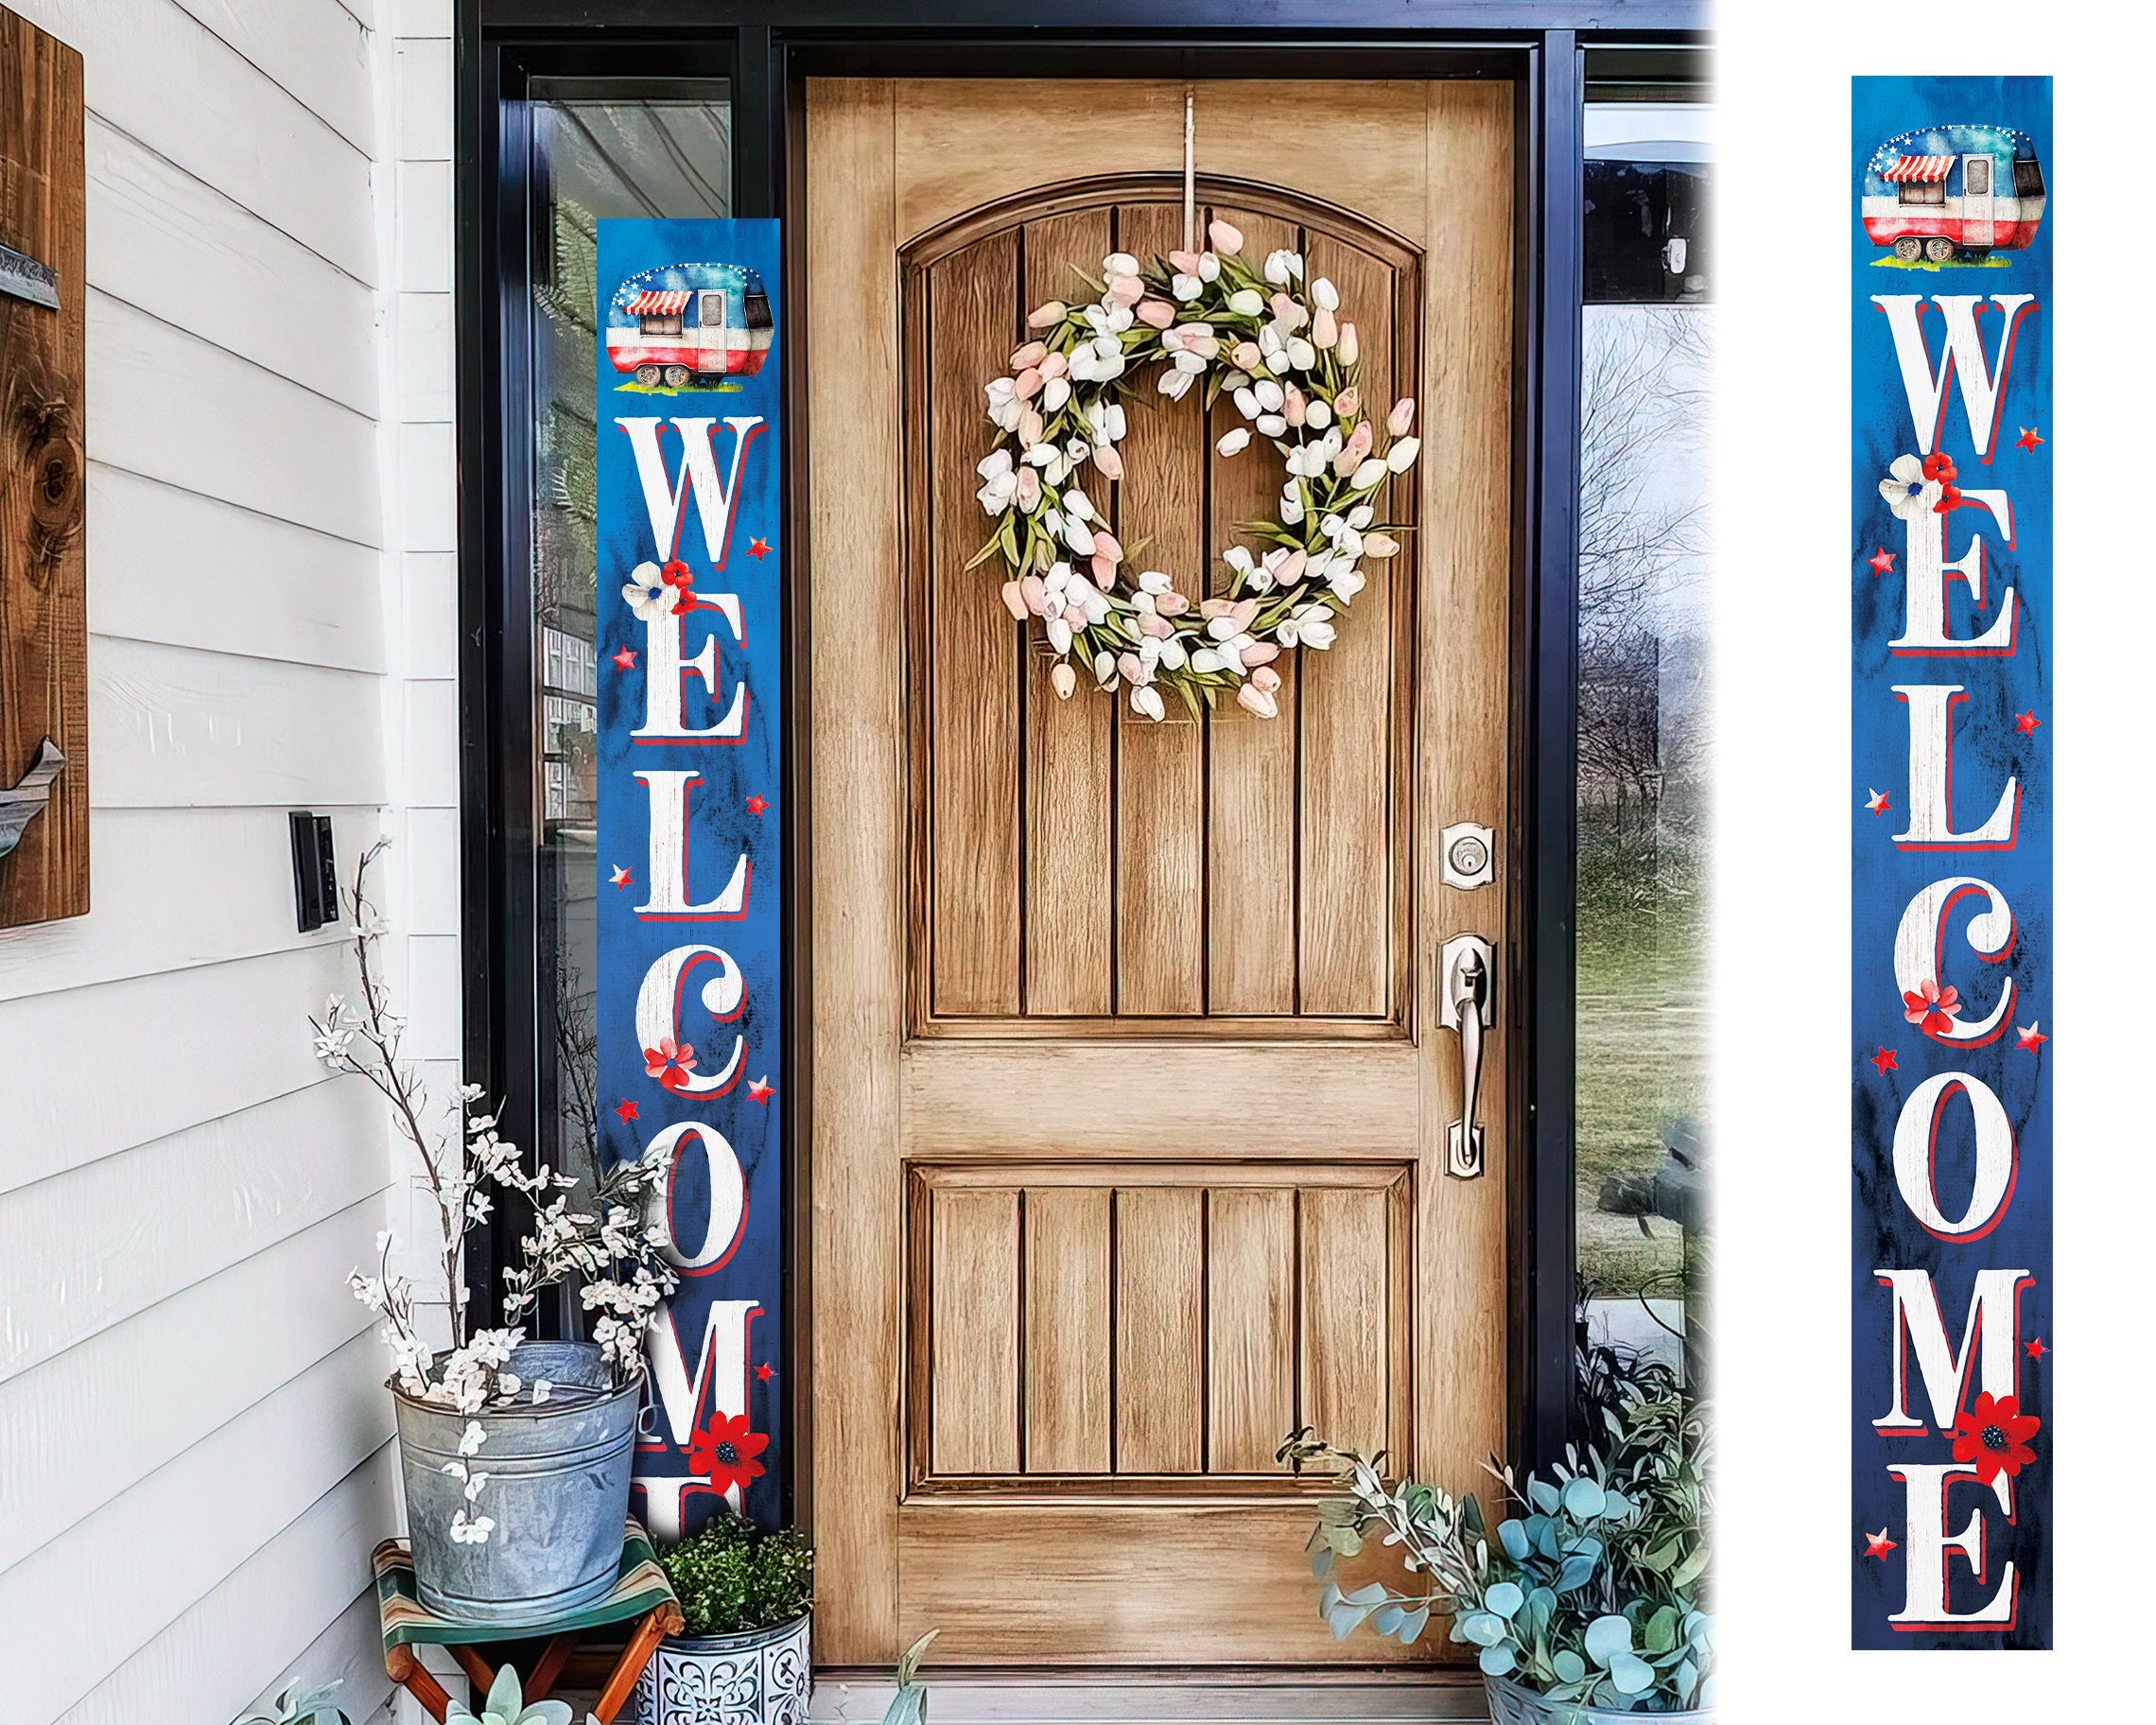 72in-4th-of-July-Welcome-Sign-|-Patriotic-Wooden-Porch-Decor-|-Vertical-Welcome-&-Firework-Designs-|-Independence-Day-Outdoor-Decor-